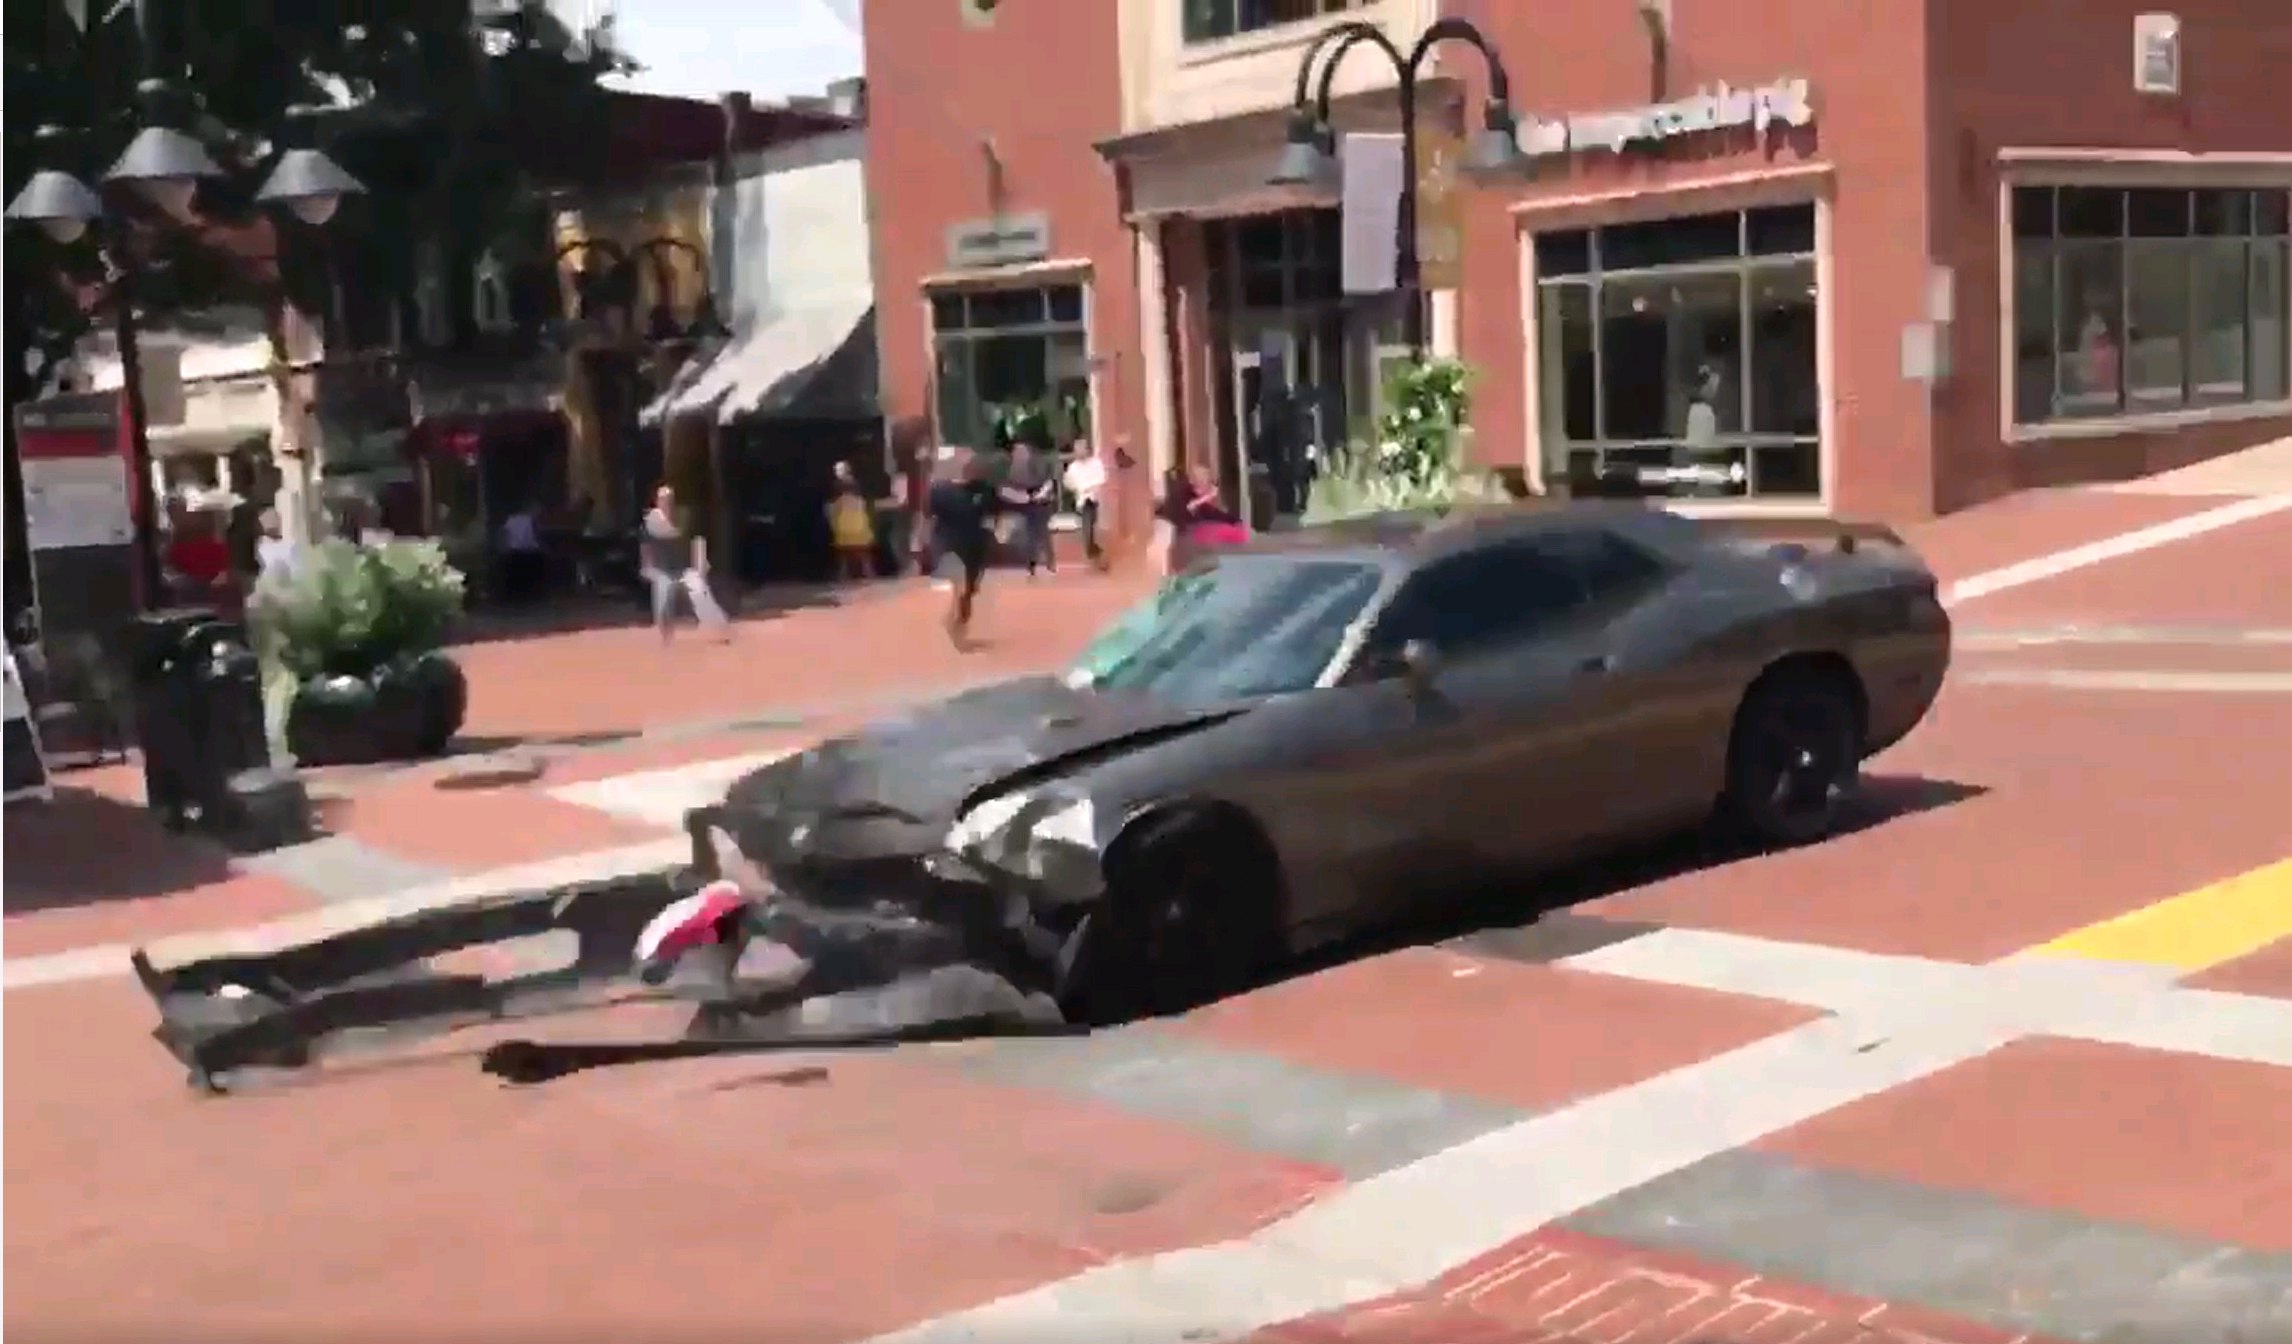 2017-08-12 00:00:00 epa06140860 A video grab made available by Brennan Gilmore? shows a car reversing after hitting a crowd in Charlottesville, Virginia, USA, 12 August 2017. According to media reports at least one person was killed after a car hit a crowd of people counter-protesting the 'Unite the Right' rally which was scheduled to take place in Charlottesville on 12 August. EPA/BRENNAN GILMORE / HANDOUT HANDOUT EDITORIAL USE ONLY/NO SALES